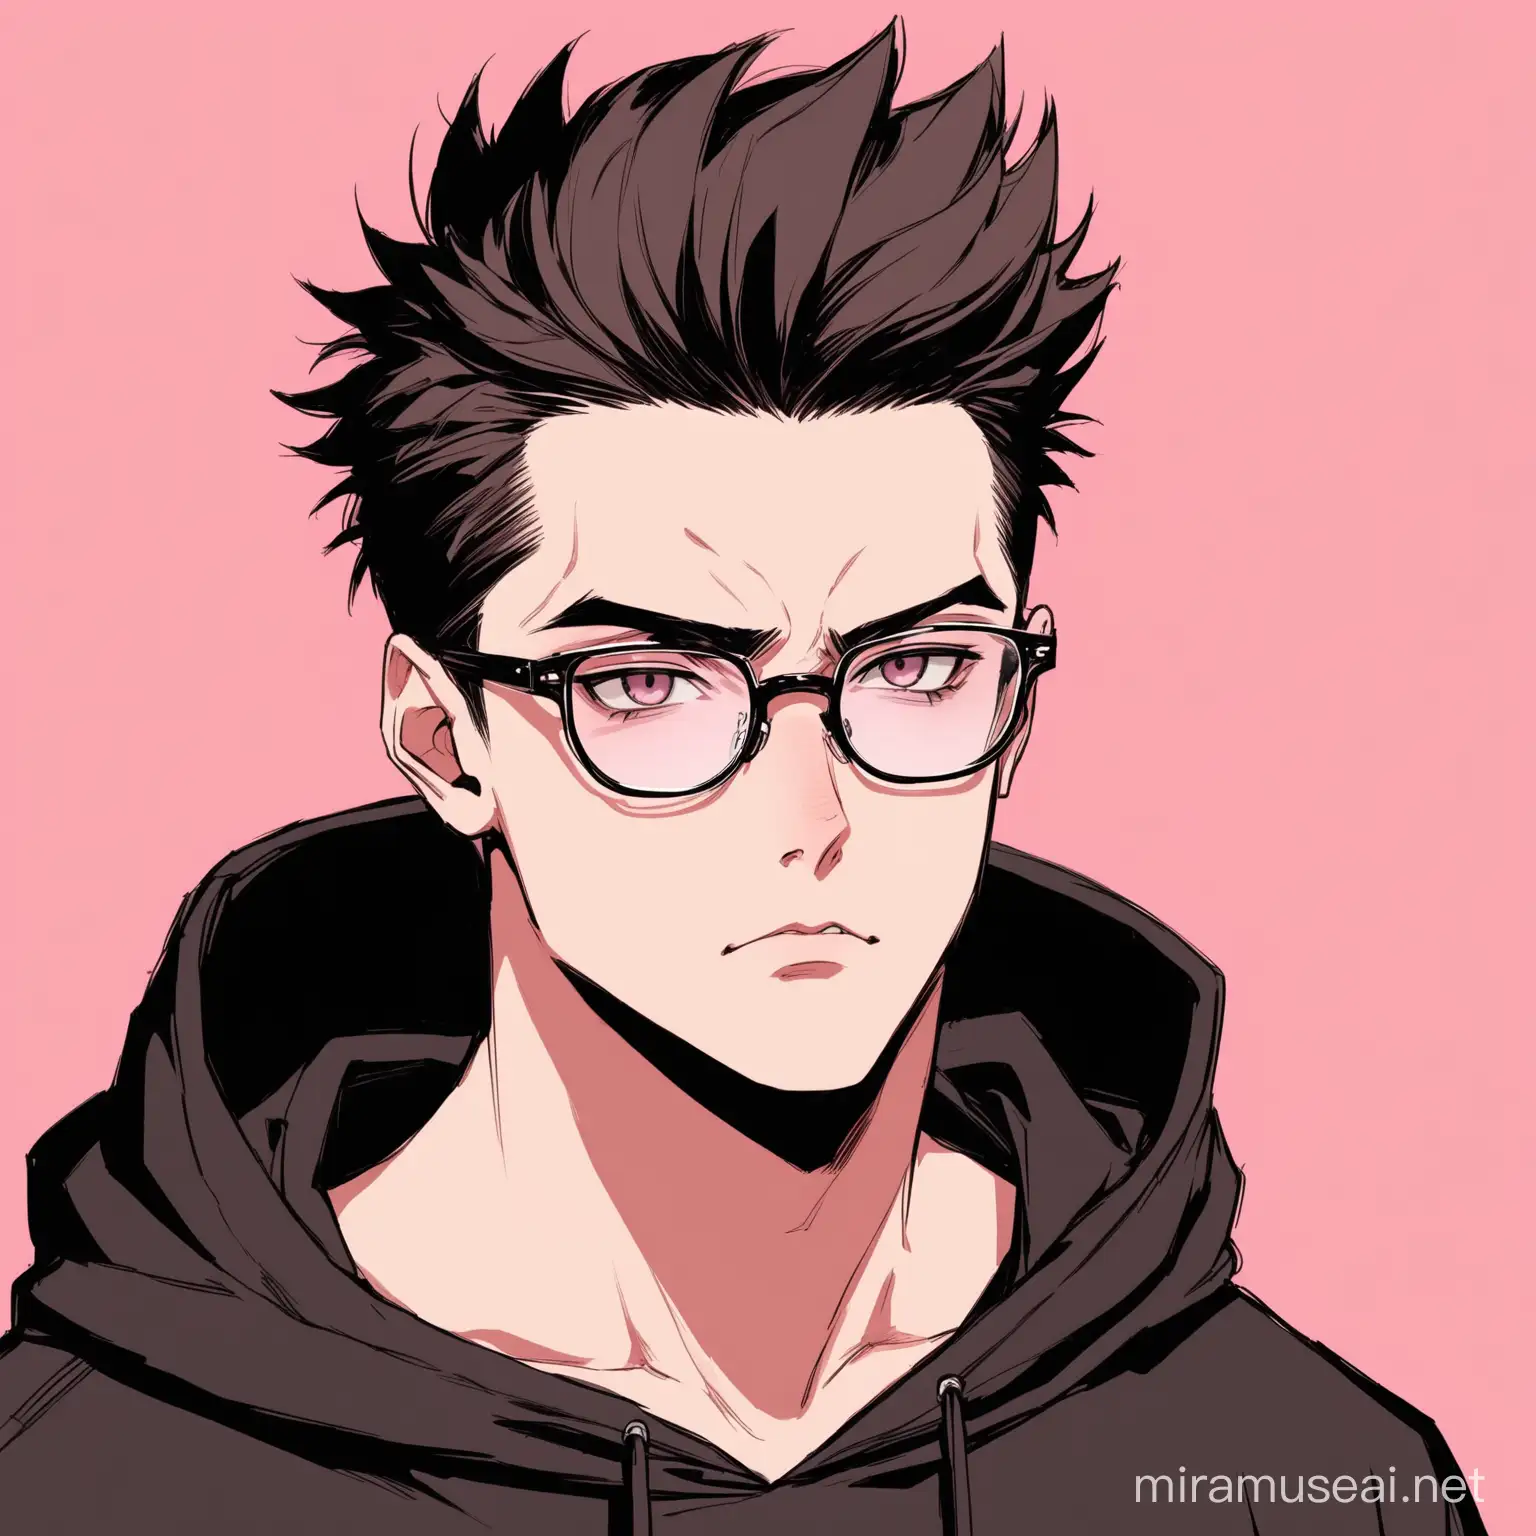 cool.,hacker,glasses,quiff hairs,black hoodie,aesthetic,oblong face shape,handsome,pink aesthetic background,small mouth,aggressive face,psychopath,black hairs ,brown colour eyes

